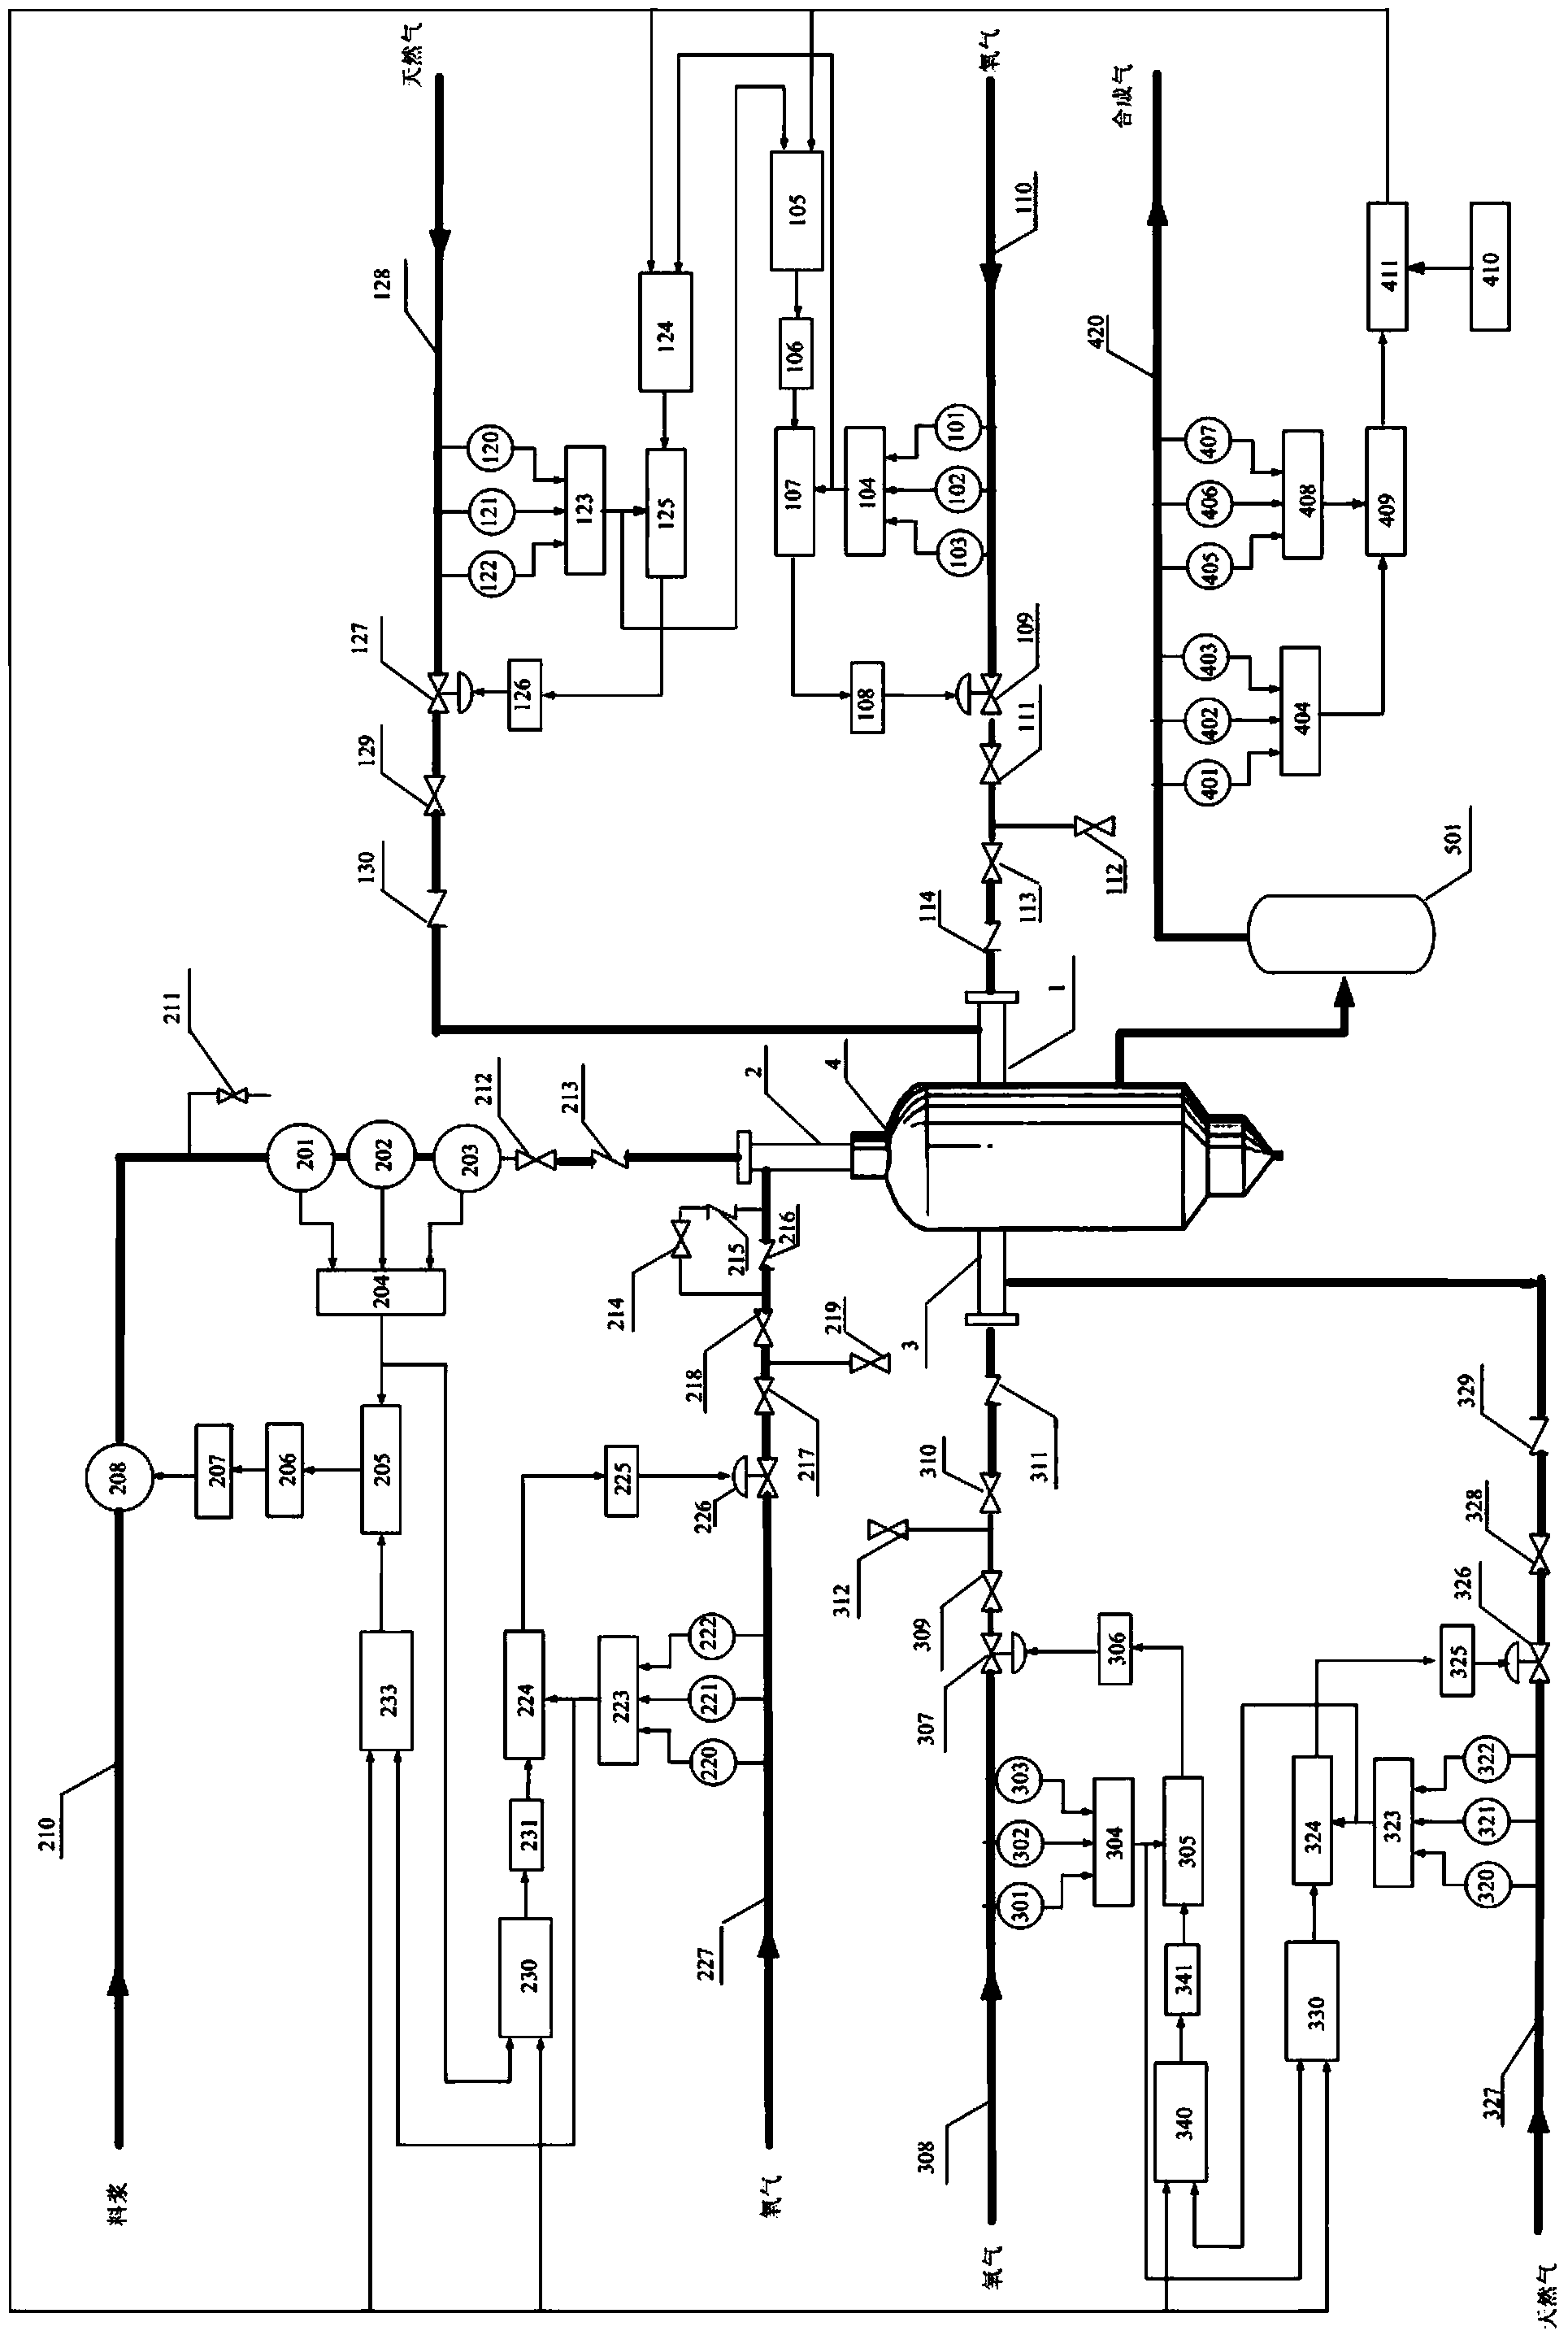 Control system for controlling ratio of hydrogen and carbonic oxide in synthesis gas production process